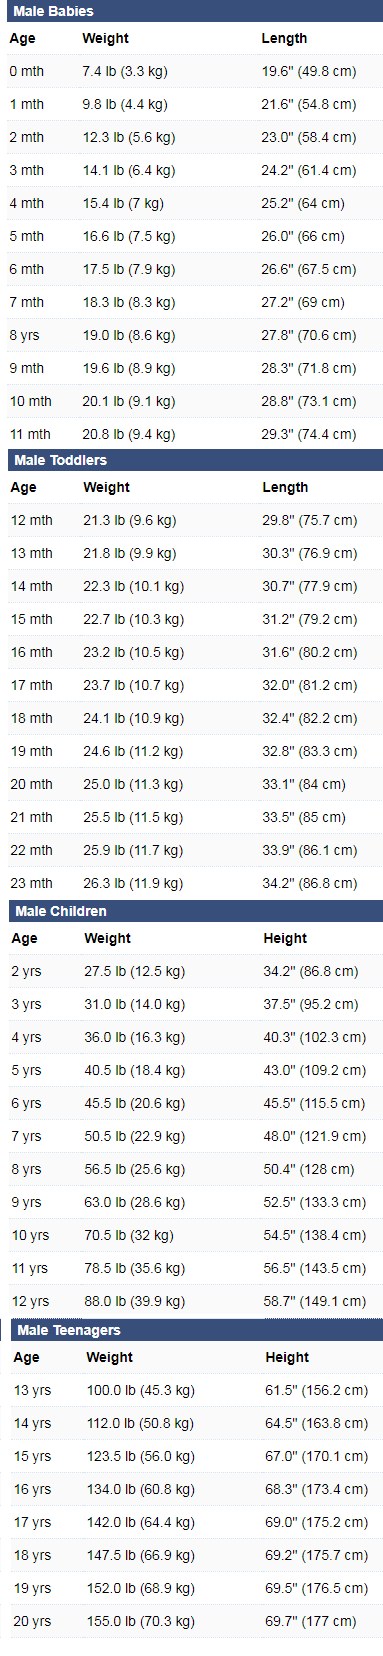 male babies height and weight chart